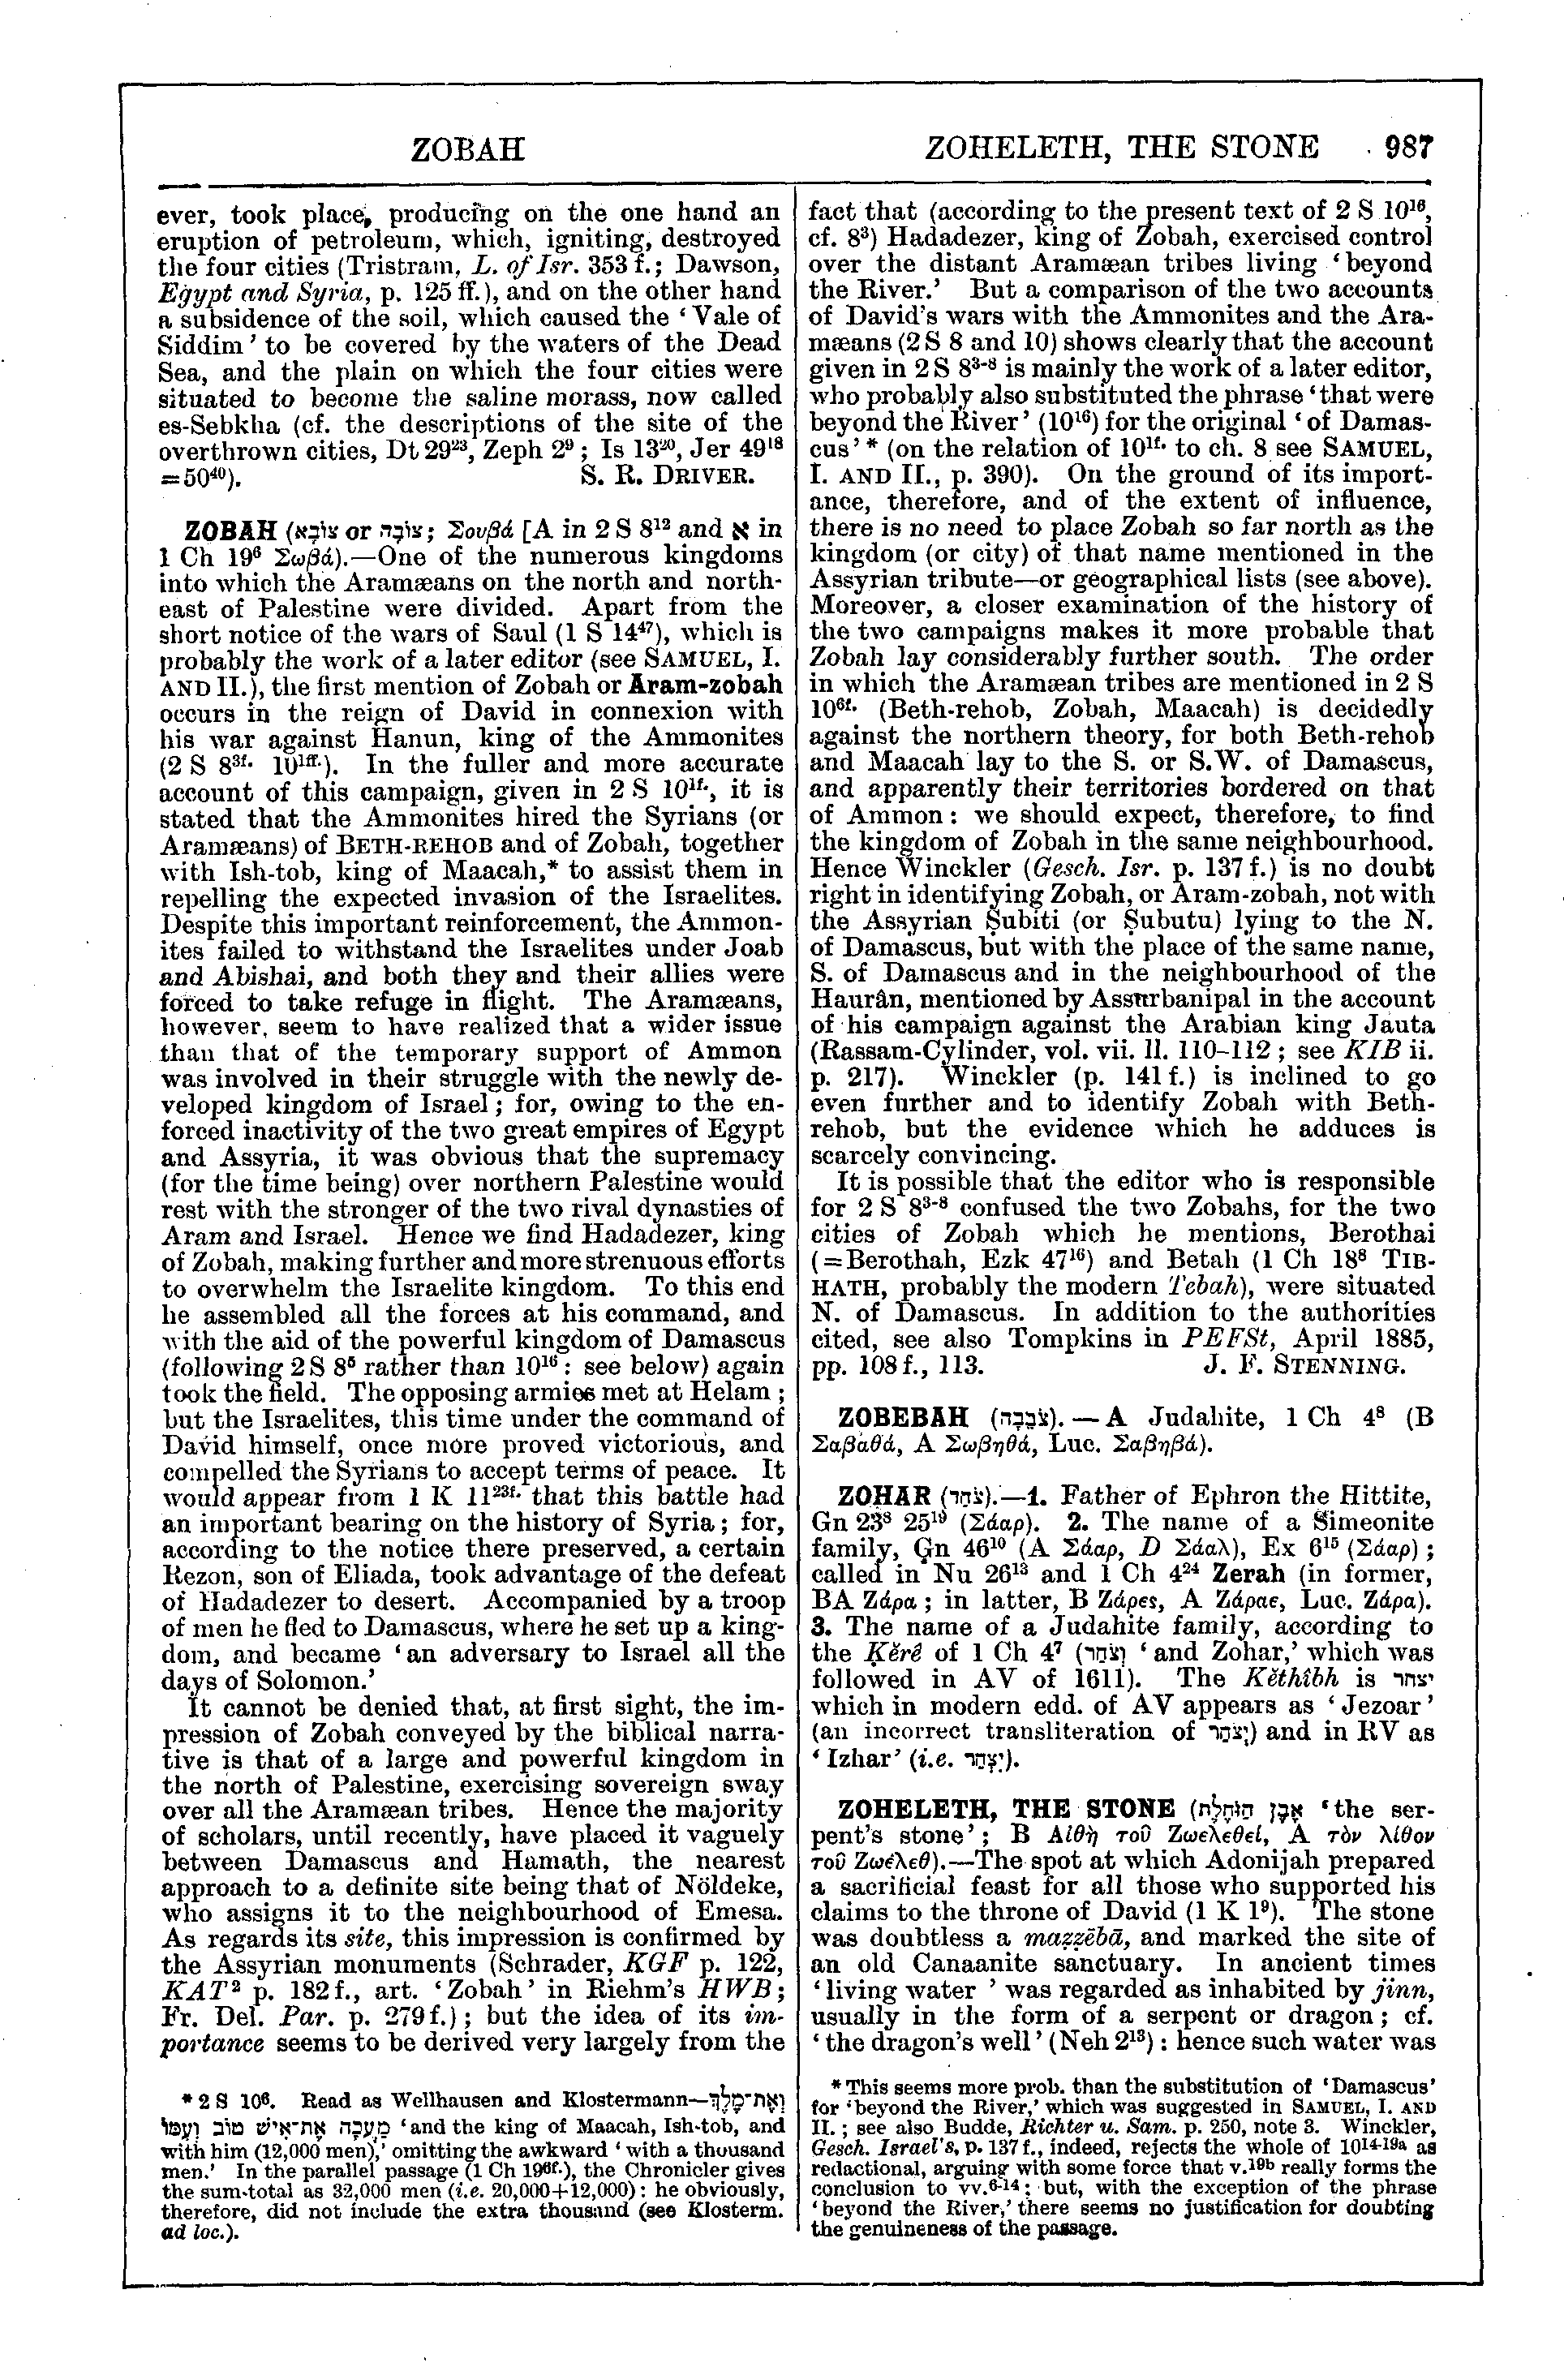 Image of page 987